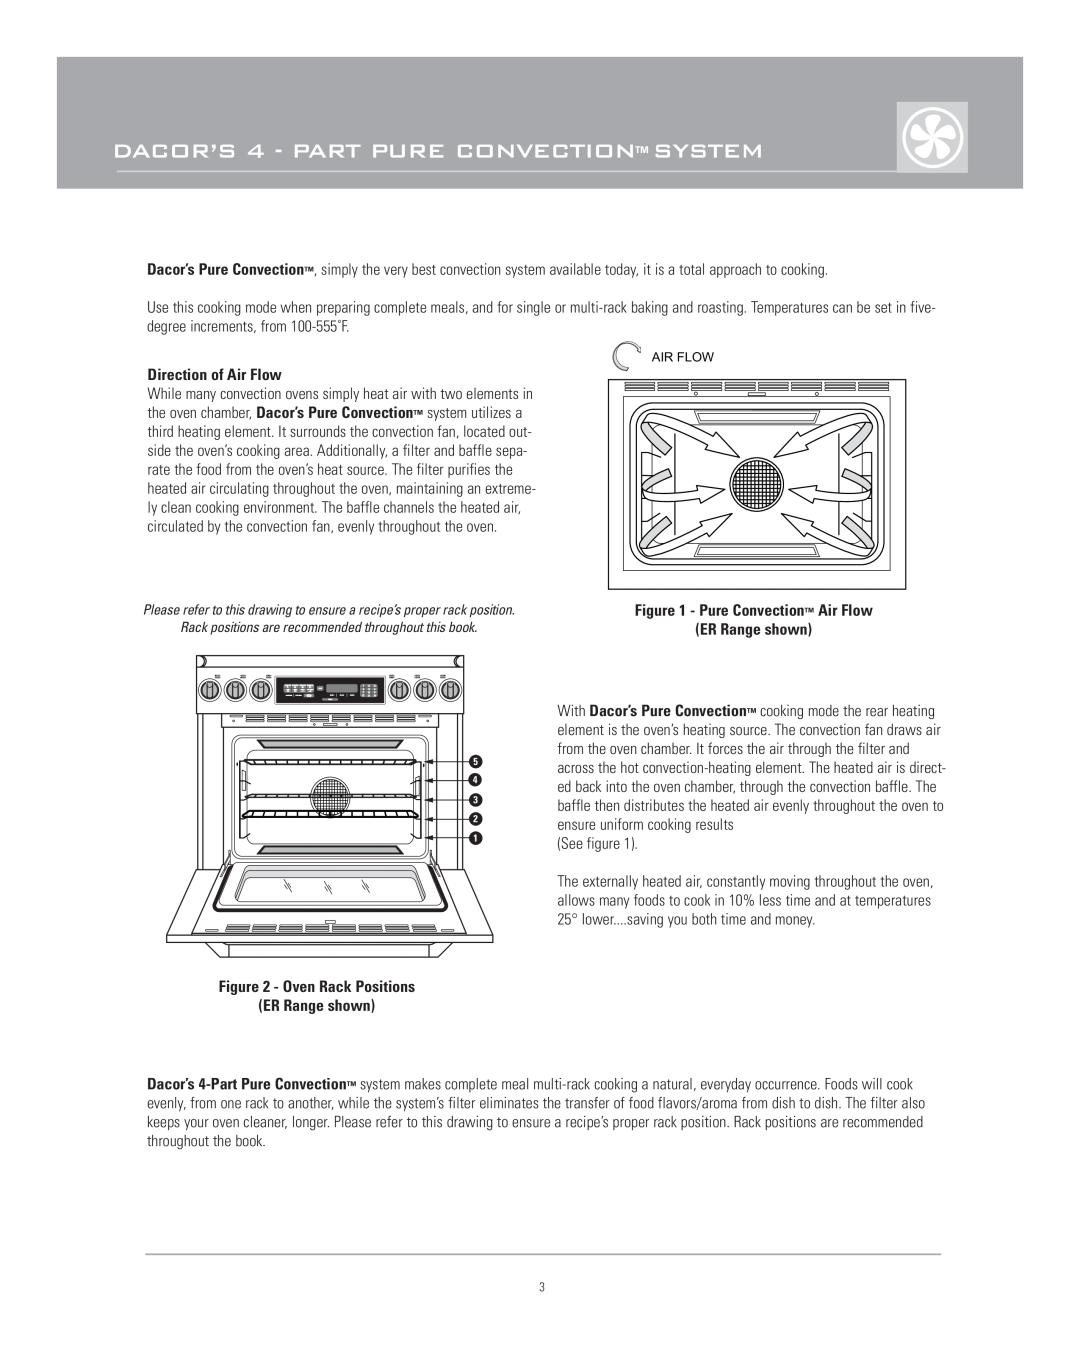 Dacor Range Cooking DACOR’S 4 - PART PURE CONVECTION SYSTEM, Direction of Air Flow, Oven Rack Positions ER Range shown 